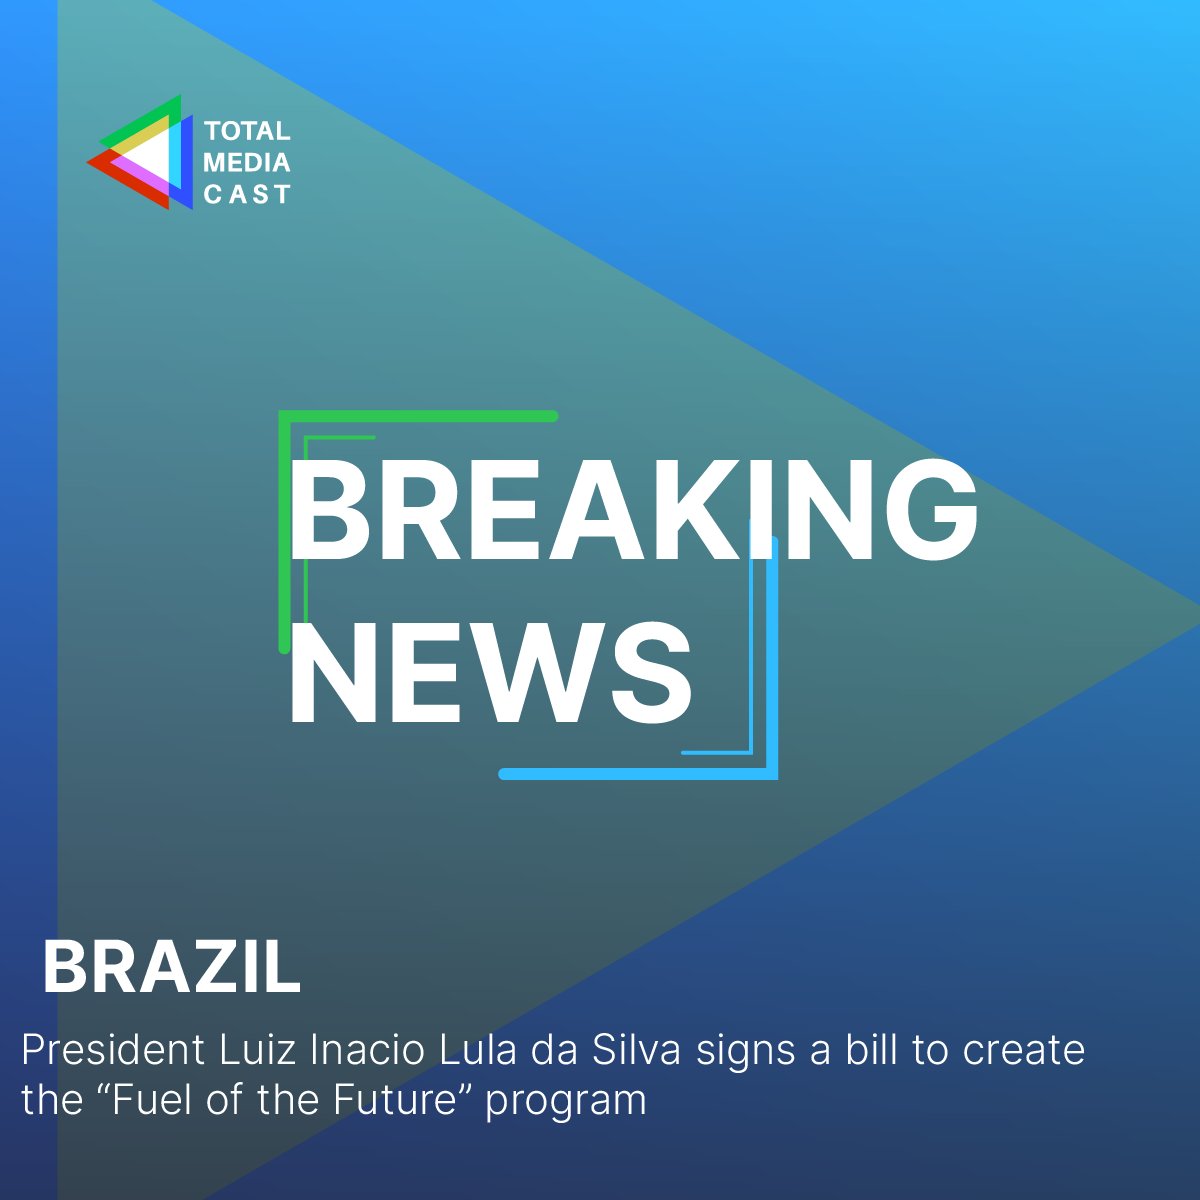 In his speech, the president said that biofuel production represents a unique opportunity for the country. Lula pointed out that after this project, Brazil will turn into something very important for the planet.
#Brazil #biofuelproduction #FueloftheFuture
#TotalMediaCast